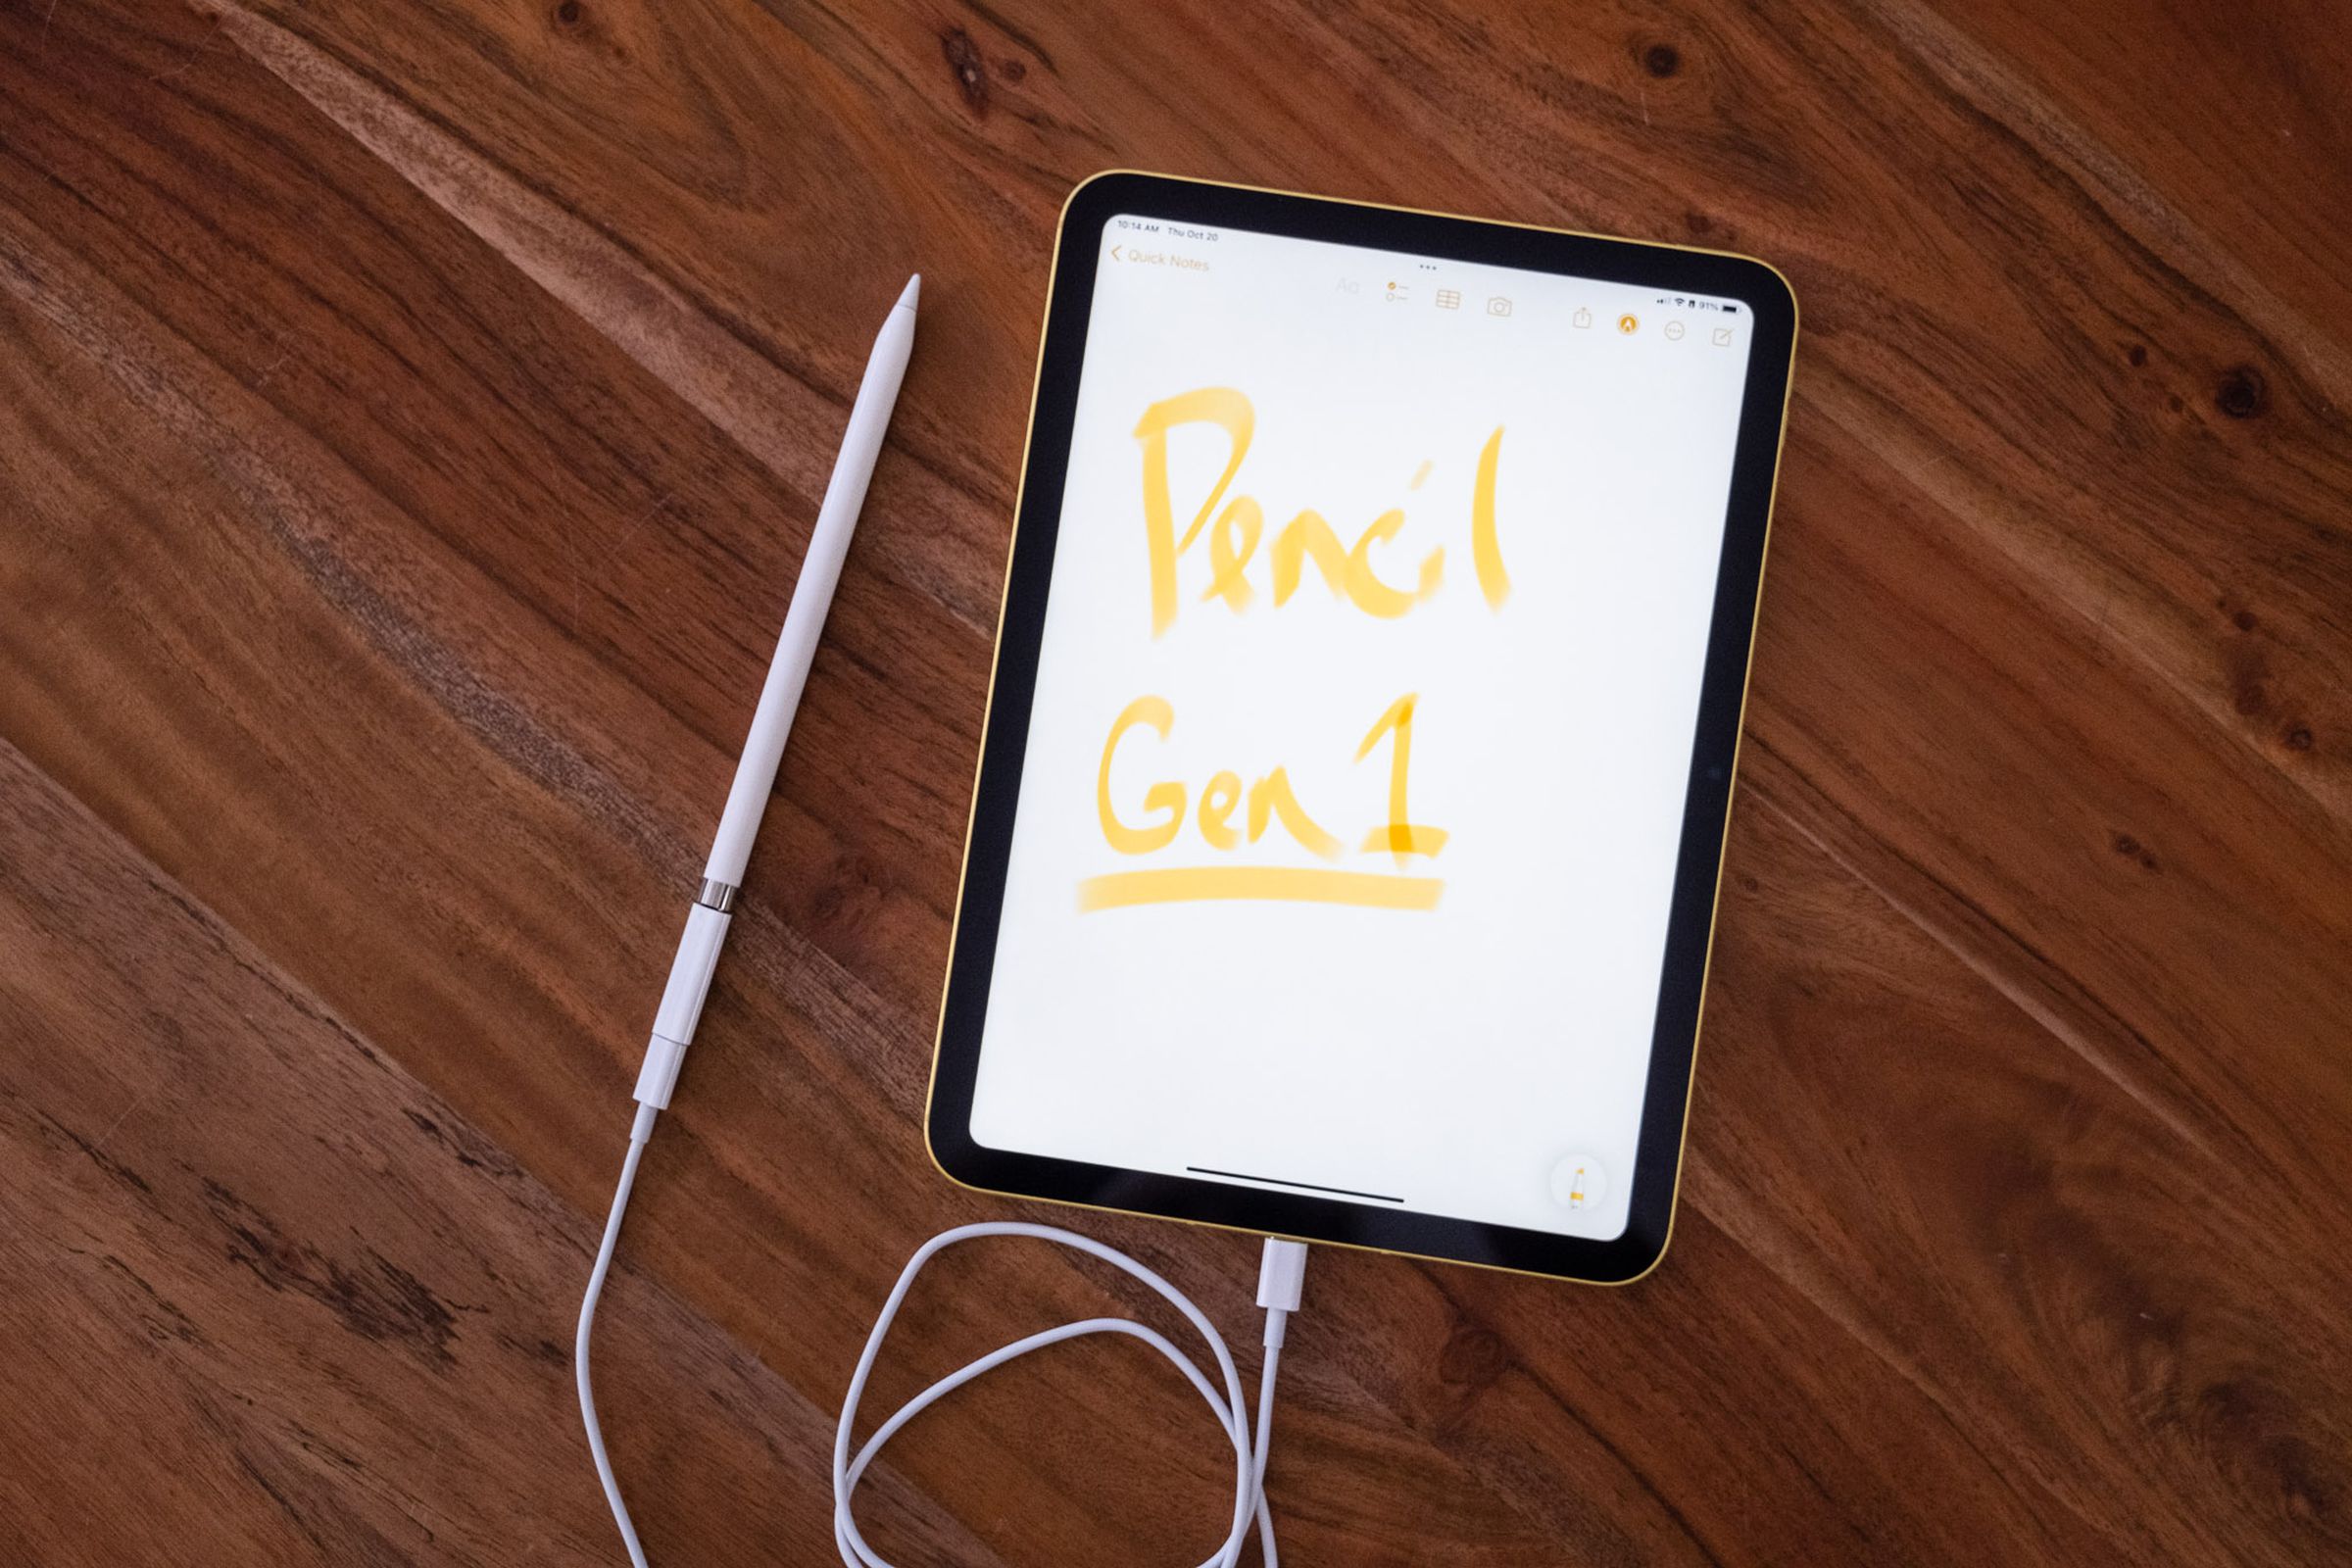 A first generation Apple Pencil plugged into a 10th gen iPad via the USB-C to lightning adapter and a USB-C cable.